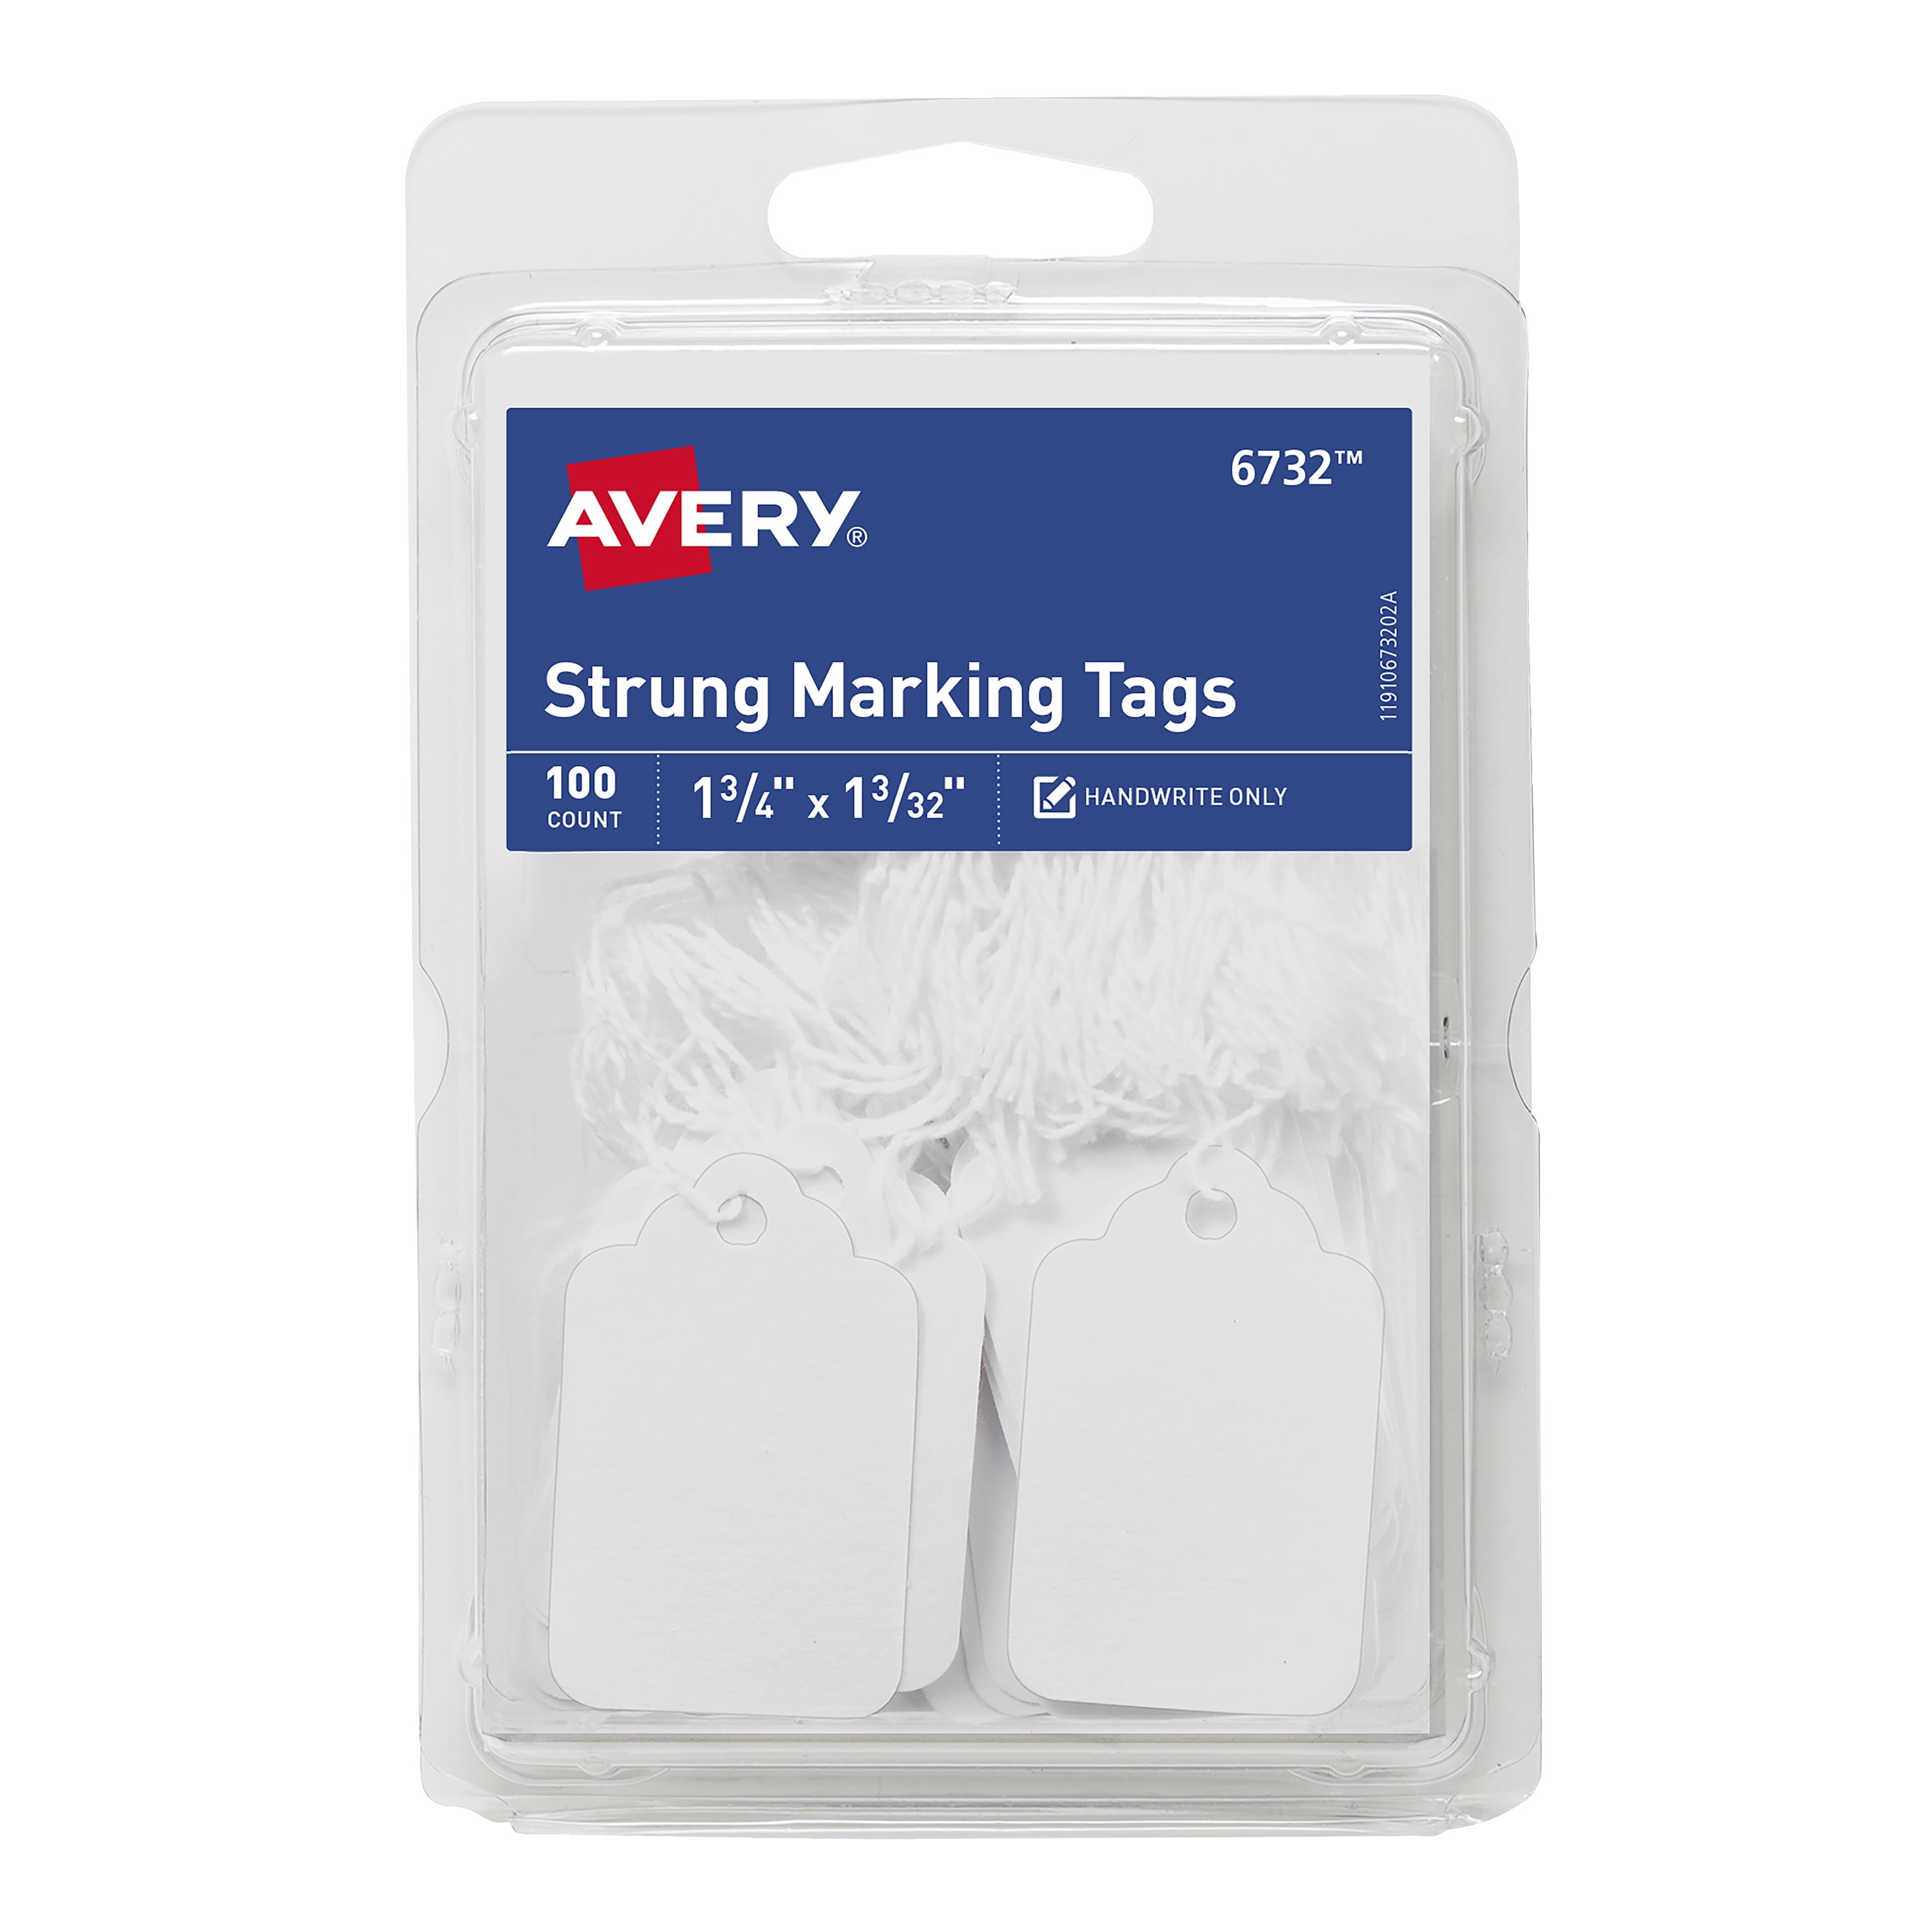 Avery White Marking Tags Strung 2 X 1 Inches 1000 Old Stock Unopened for sale online 